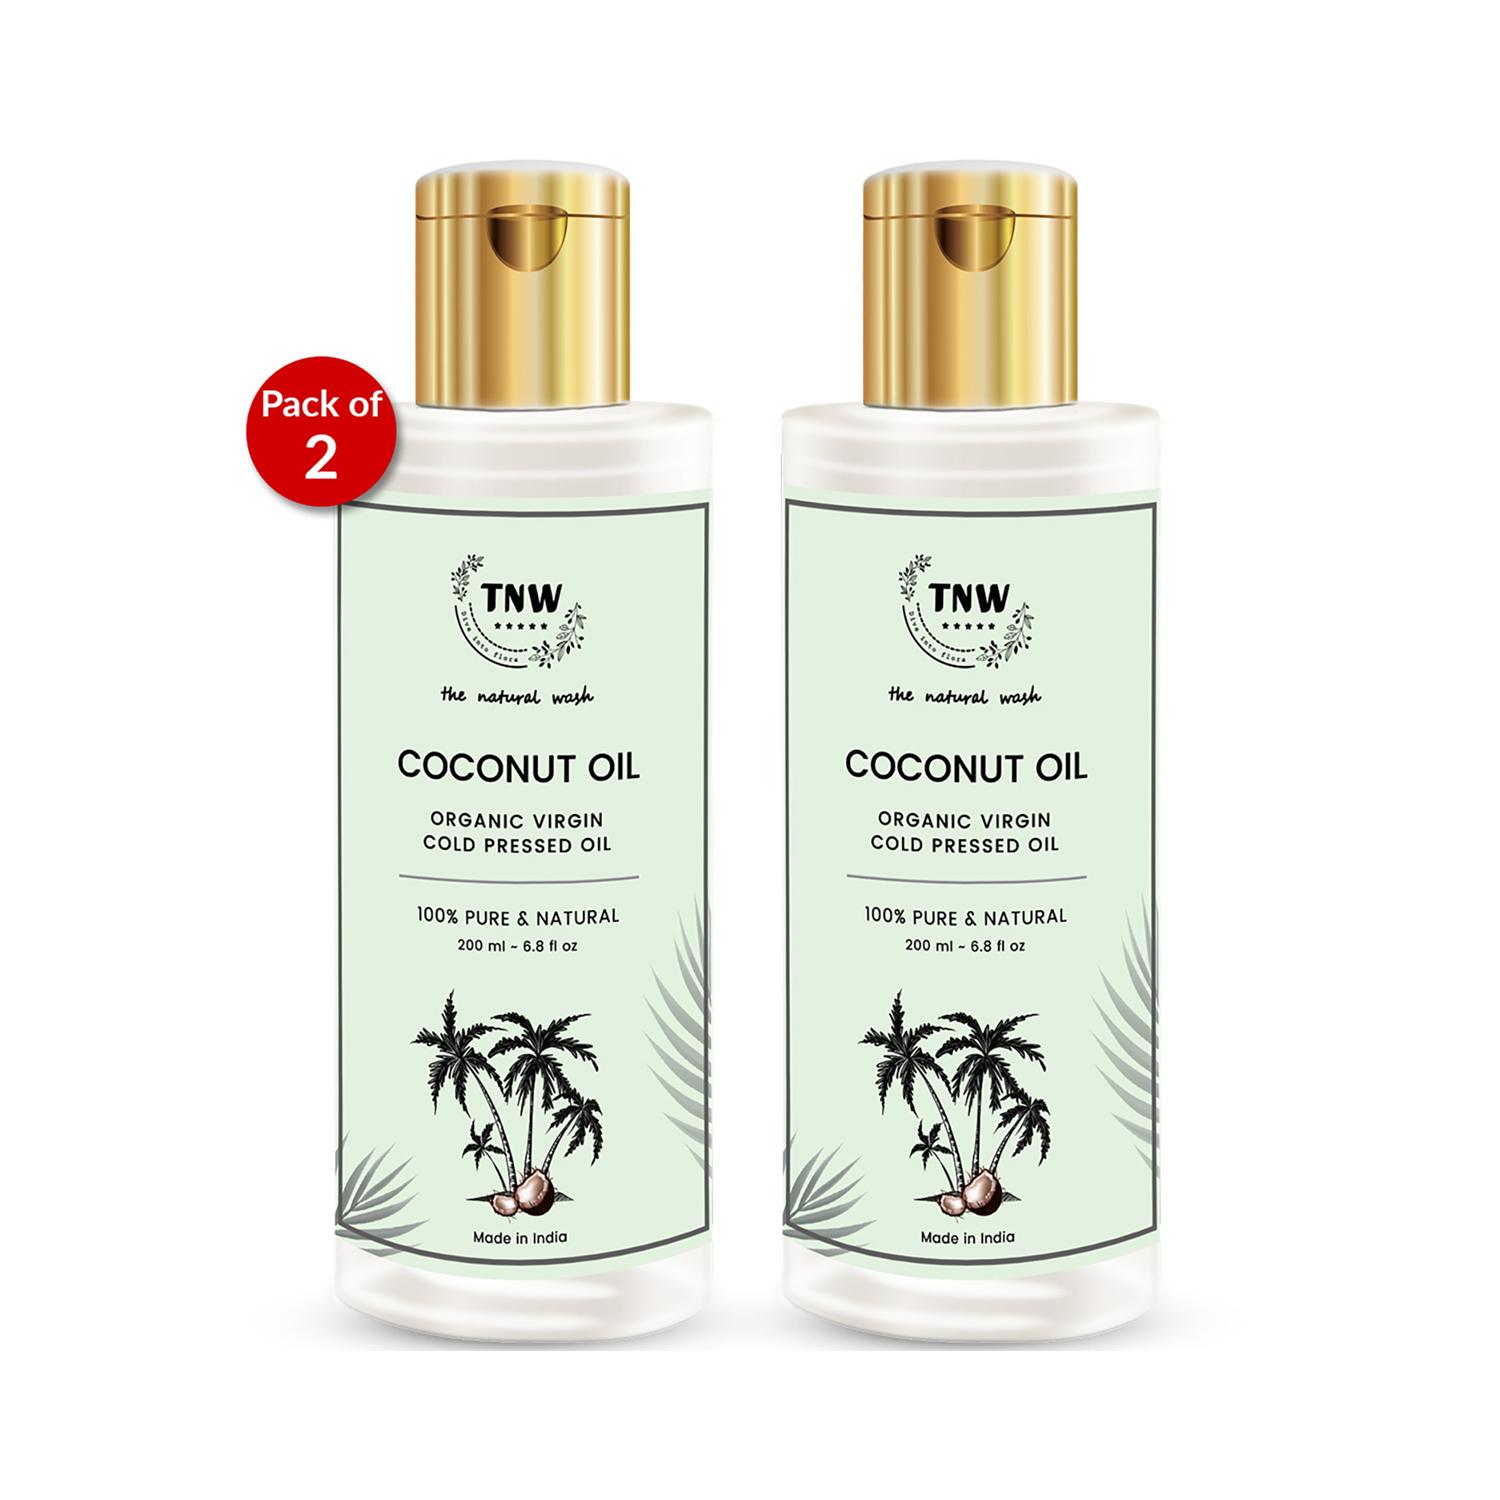 TNW - The Natural Wash Coconut Oil Pack of 2 Combo